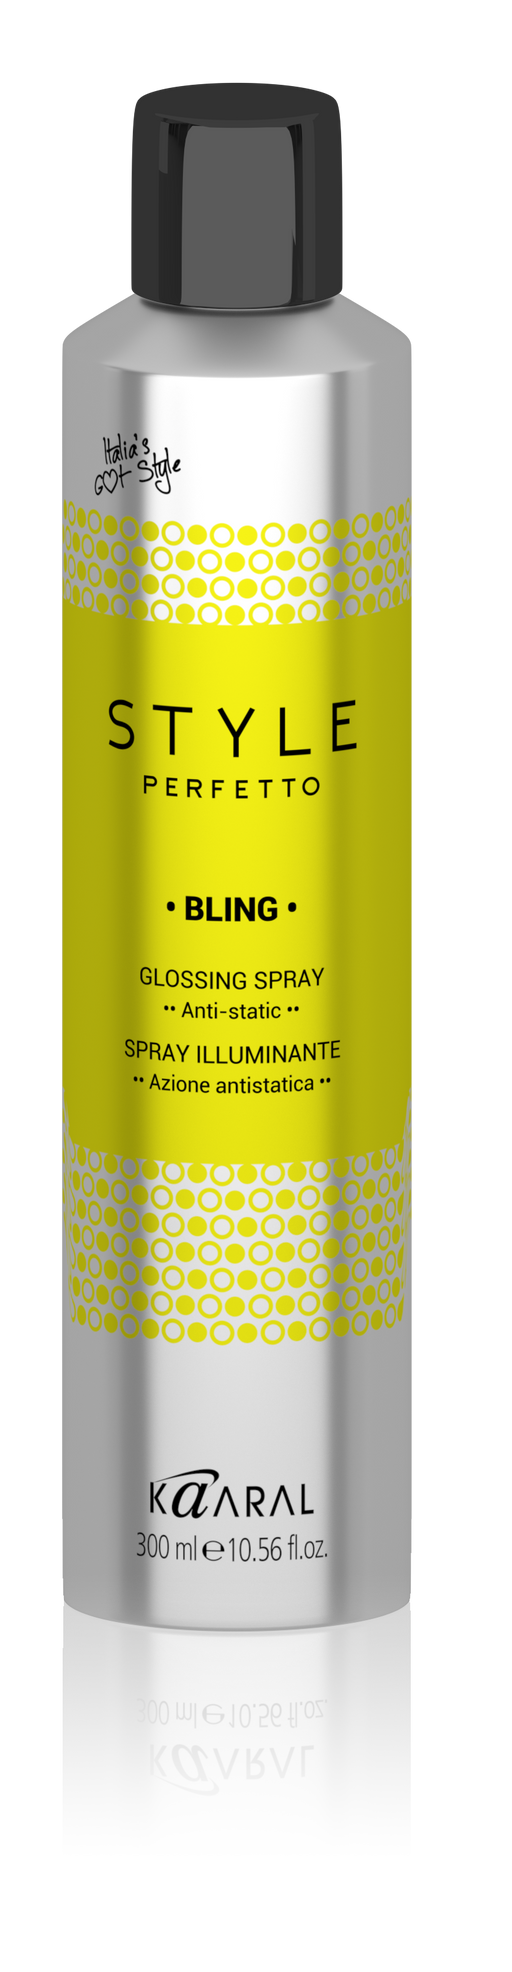 Kaaral Style Perfetto Bling Glossing Spray - Clearance!